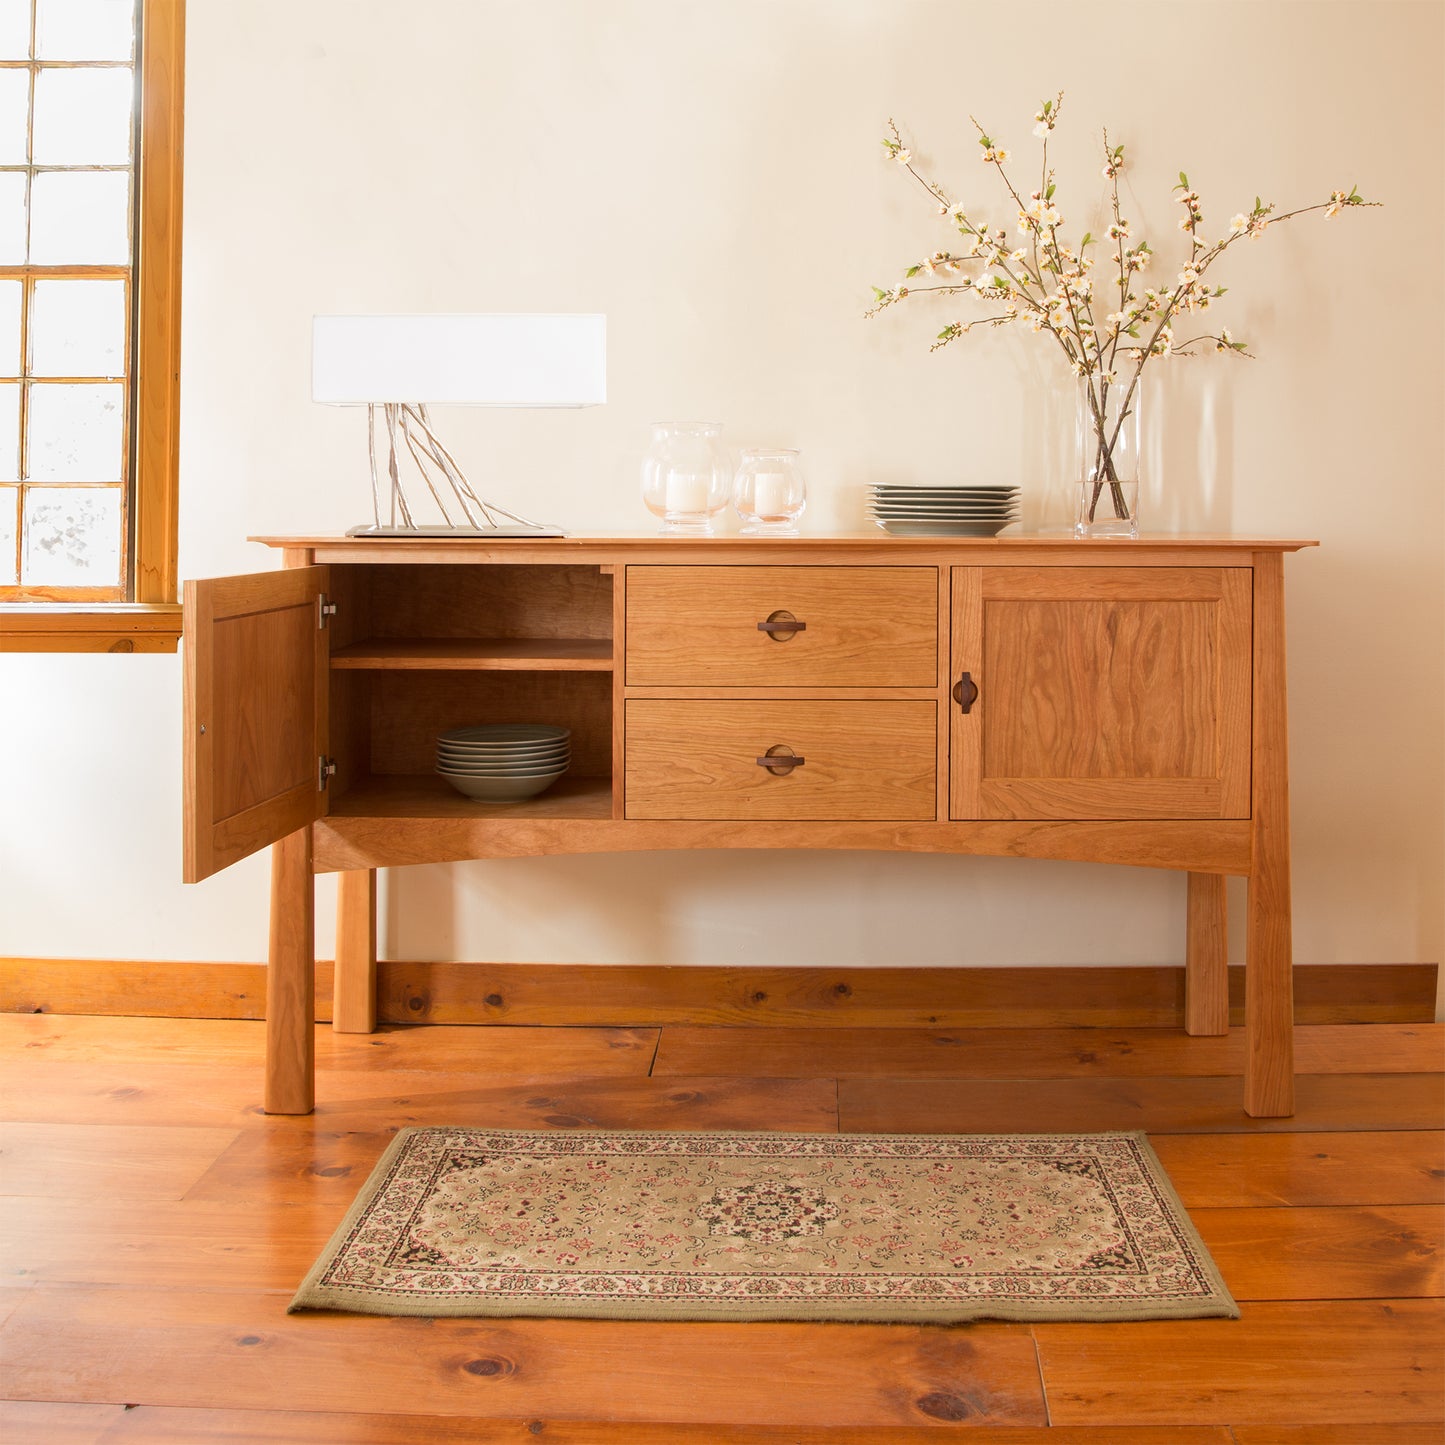 A Maple Corner Woodworks Cherry Moon Huntboard featuring drawers and cabinets, placed in a room with a hardwood floor. On top, there's a lamp and a vase with branches. A small rug is positioned 